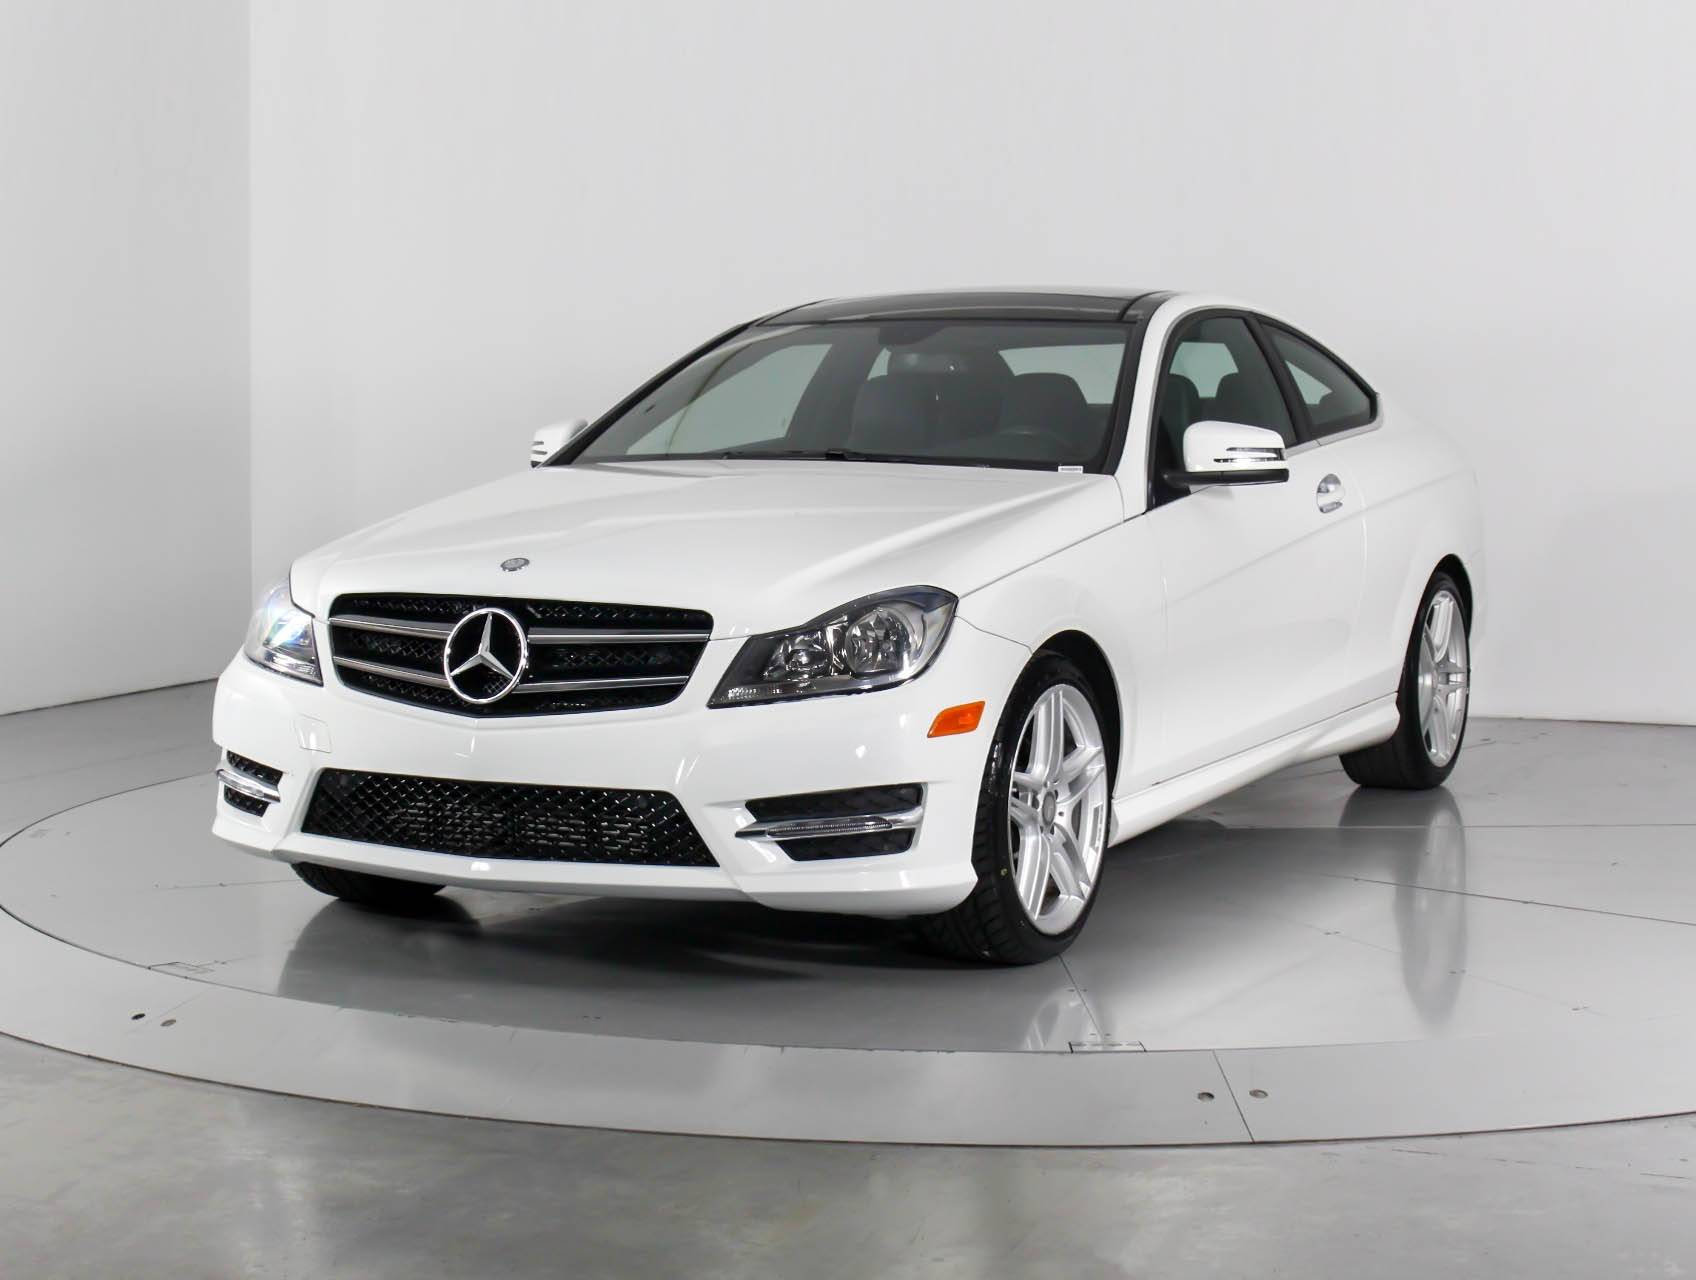 Used 15 Mercedes Benz C Class C250 Coupe For Sale In West Palm Fl Florida Fine Cars